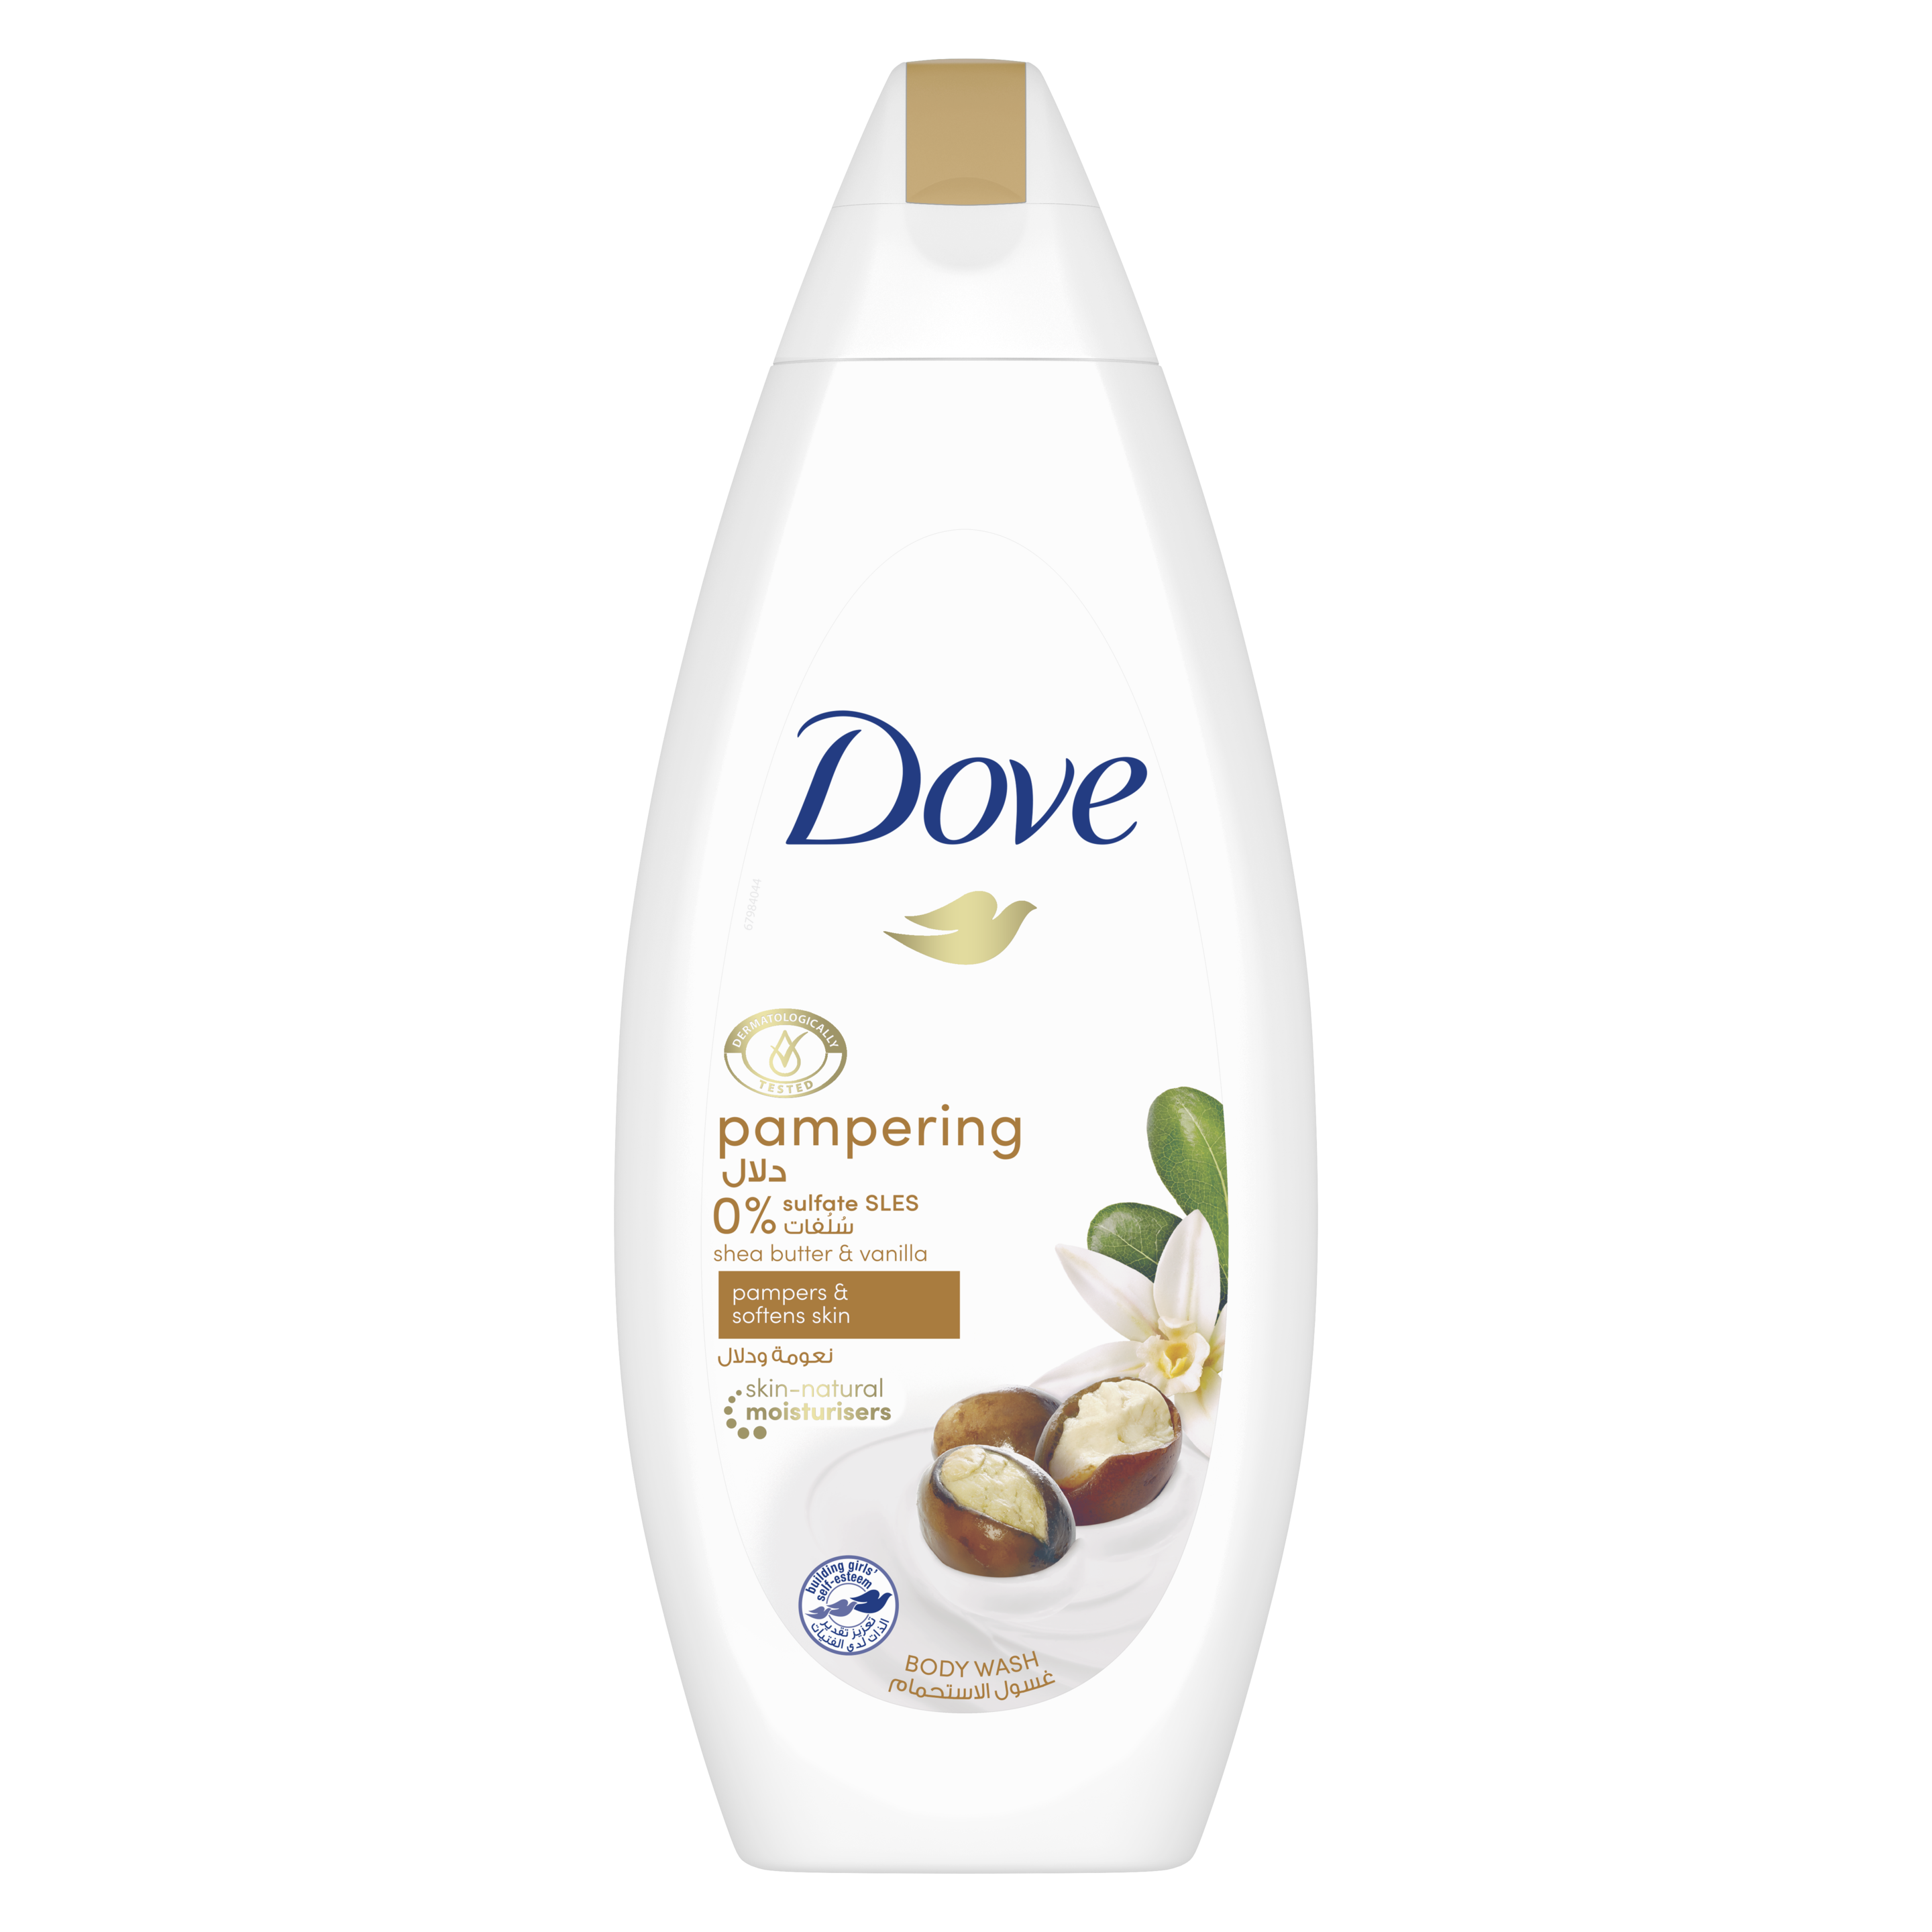 dove purely pampering nourishing lotion